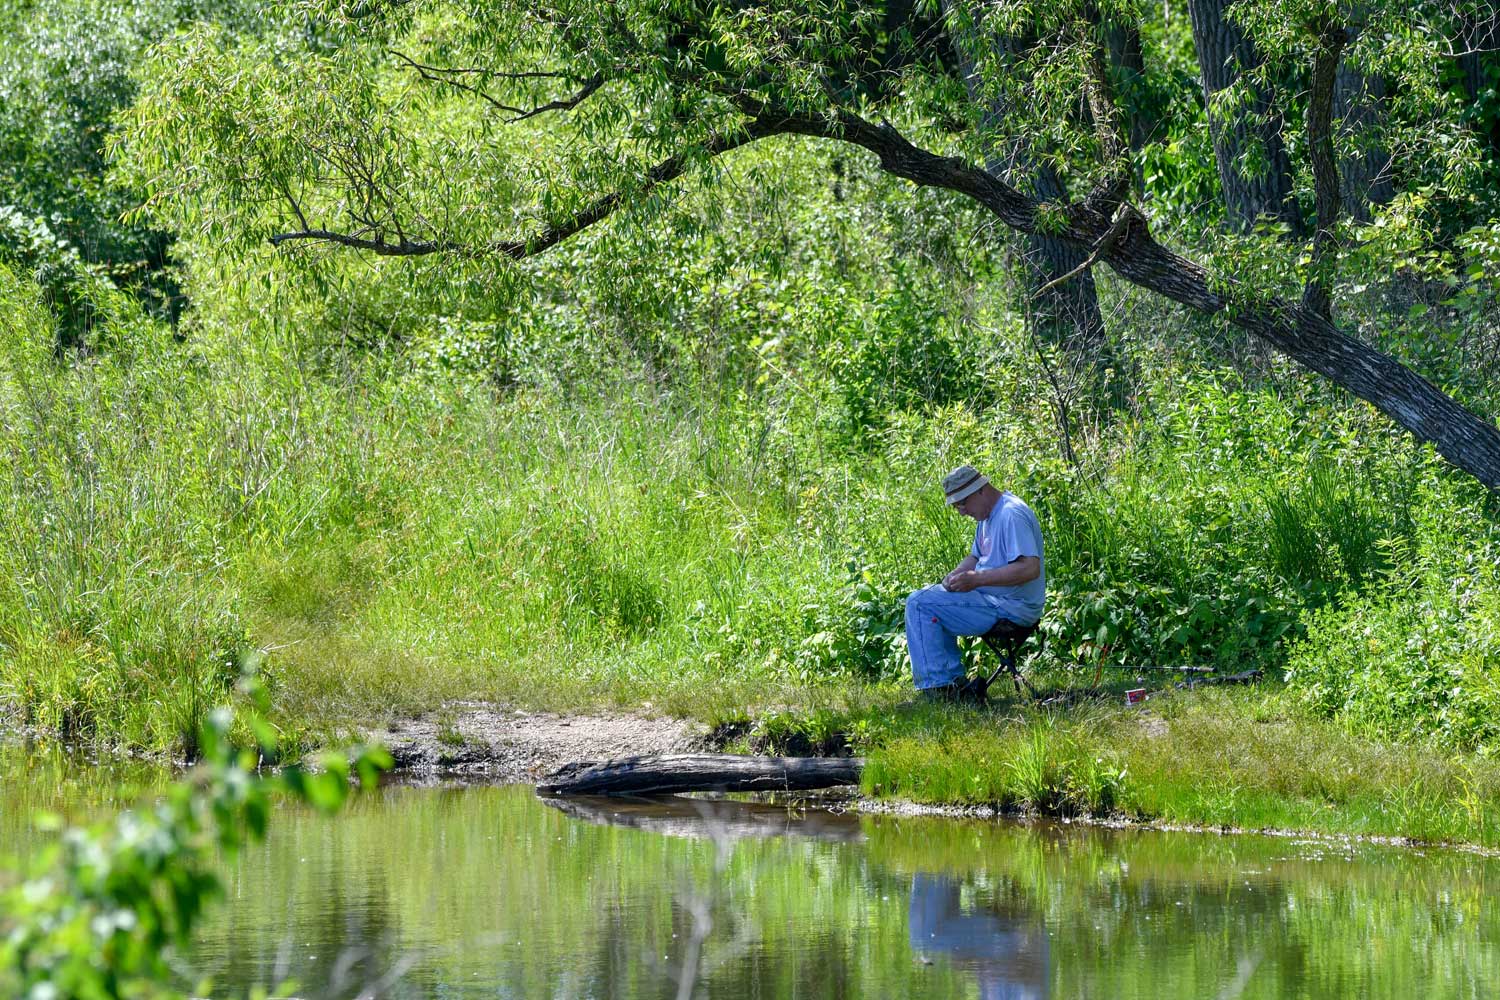 A man sitting along a shoreline getting a fishing pole ready to cast.